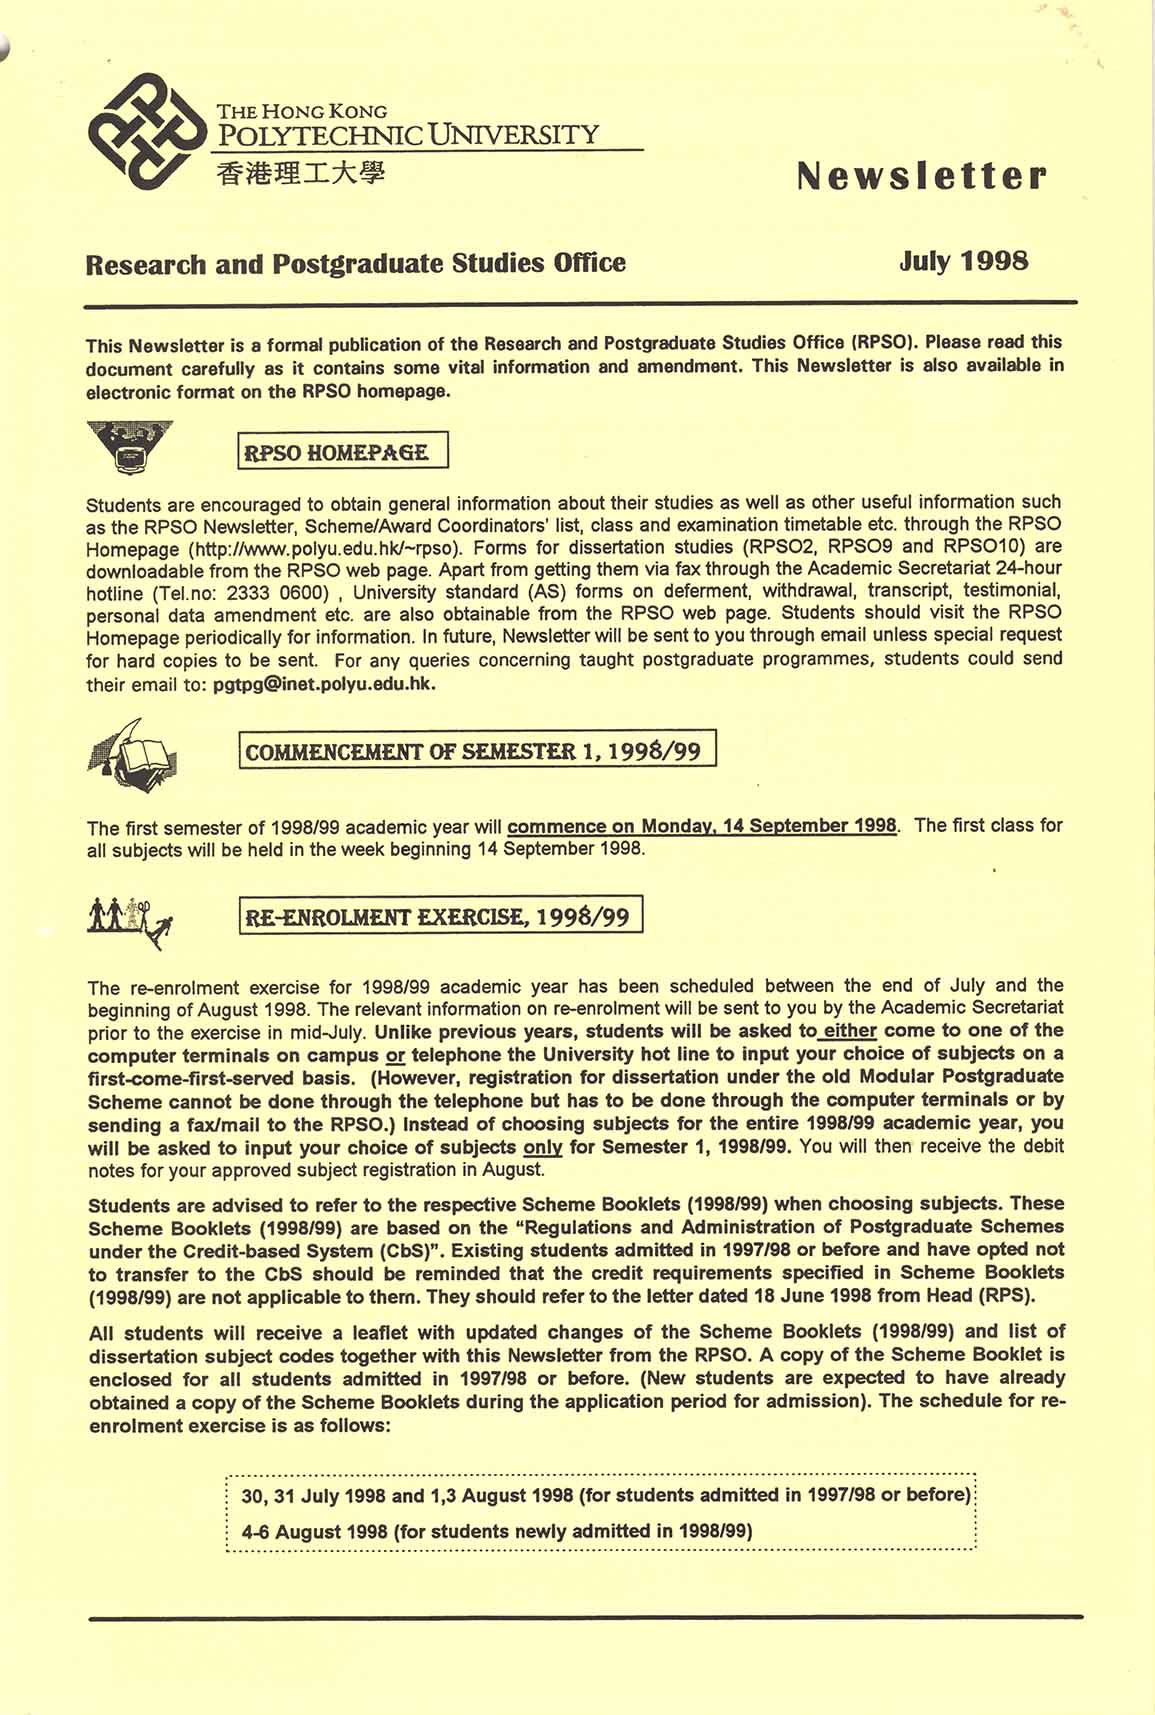 Research and Postgraduate Studies Office newsletter [1998-1999]